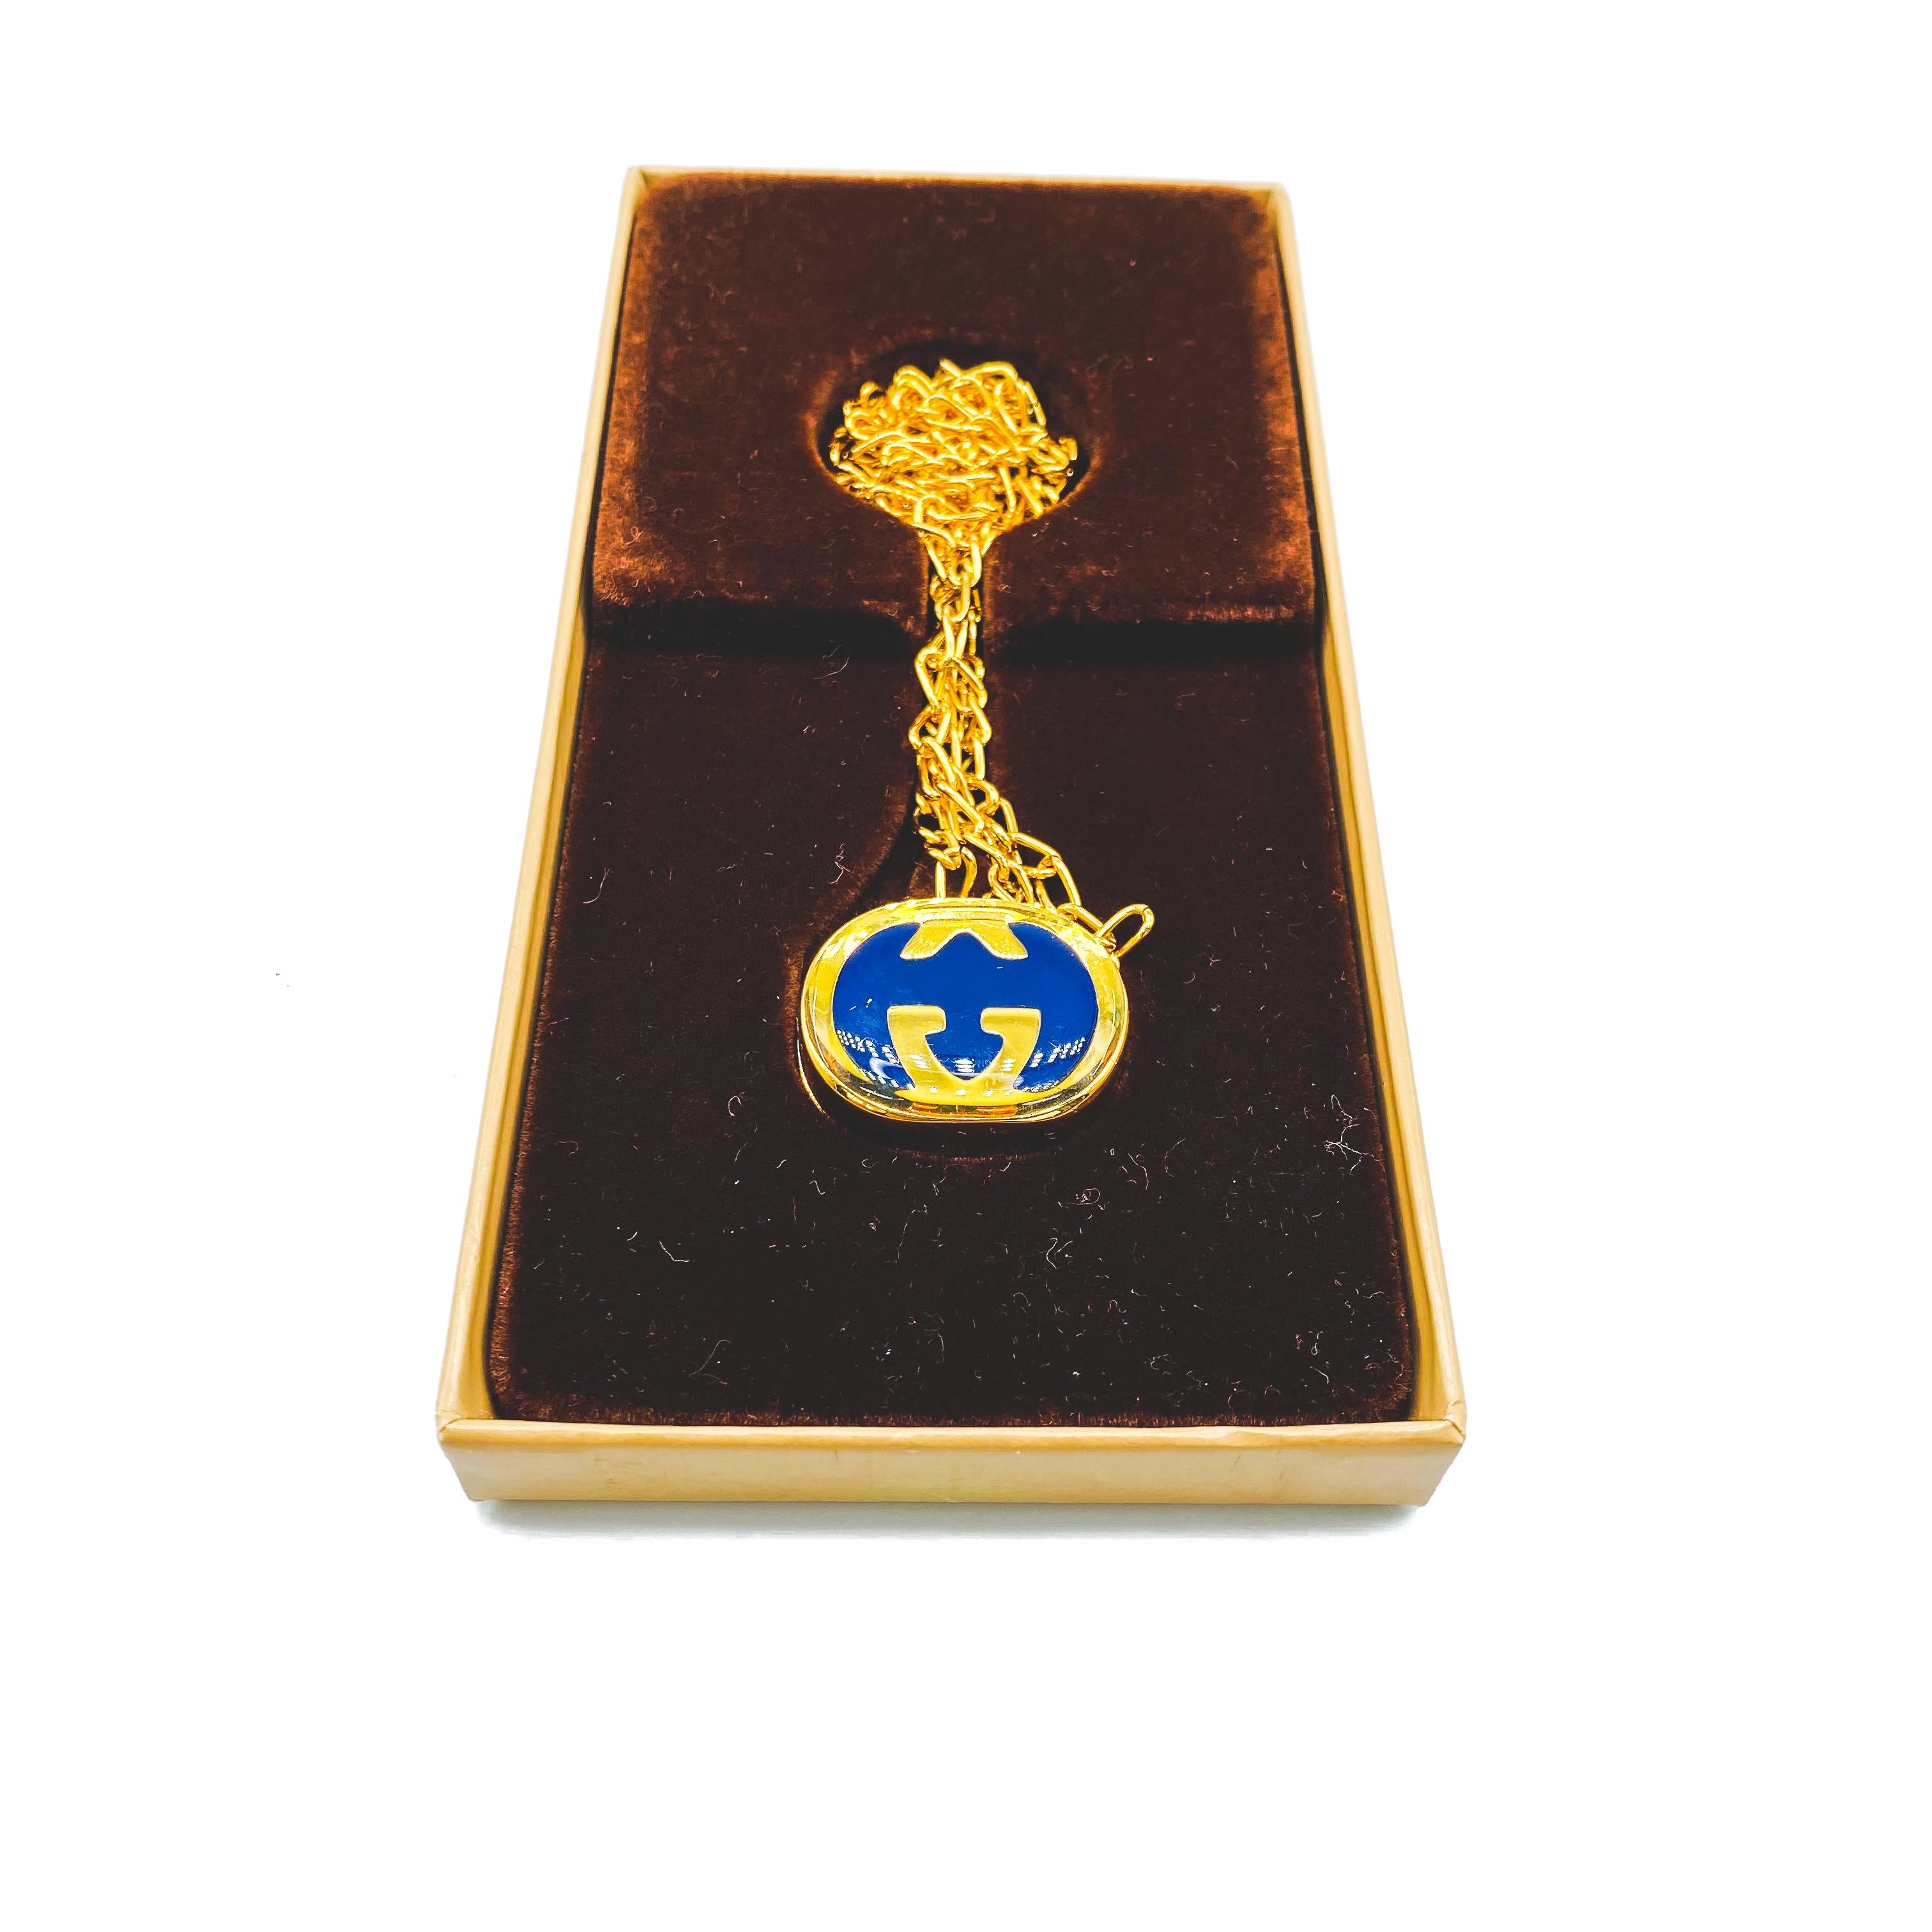 Gucci 1970s Vintage Pill Box Necklace

An amazing and rare statement piece from the 1970s Gucci archive. 

Detail
-Made in Italy in the 1970s
-Crafted from gold plated metal
-Features the iconic double G Gucci logo

Size & Fit
-Length approx 29